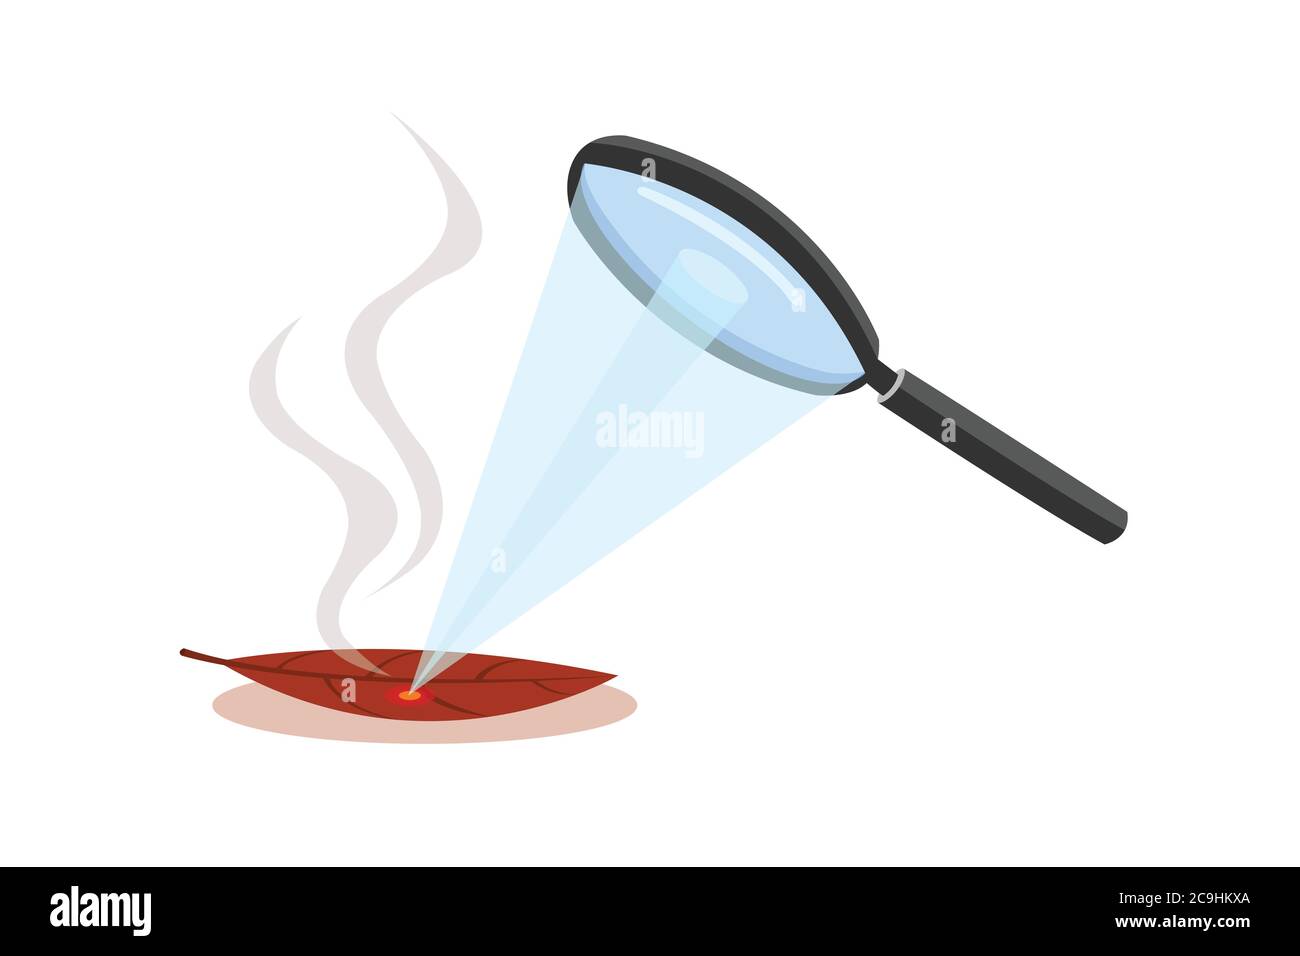 Magnifying glass is combining light into one point to dry leaves can cause burns. Magnifying glass can cause burning. Stock Vector